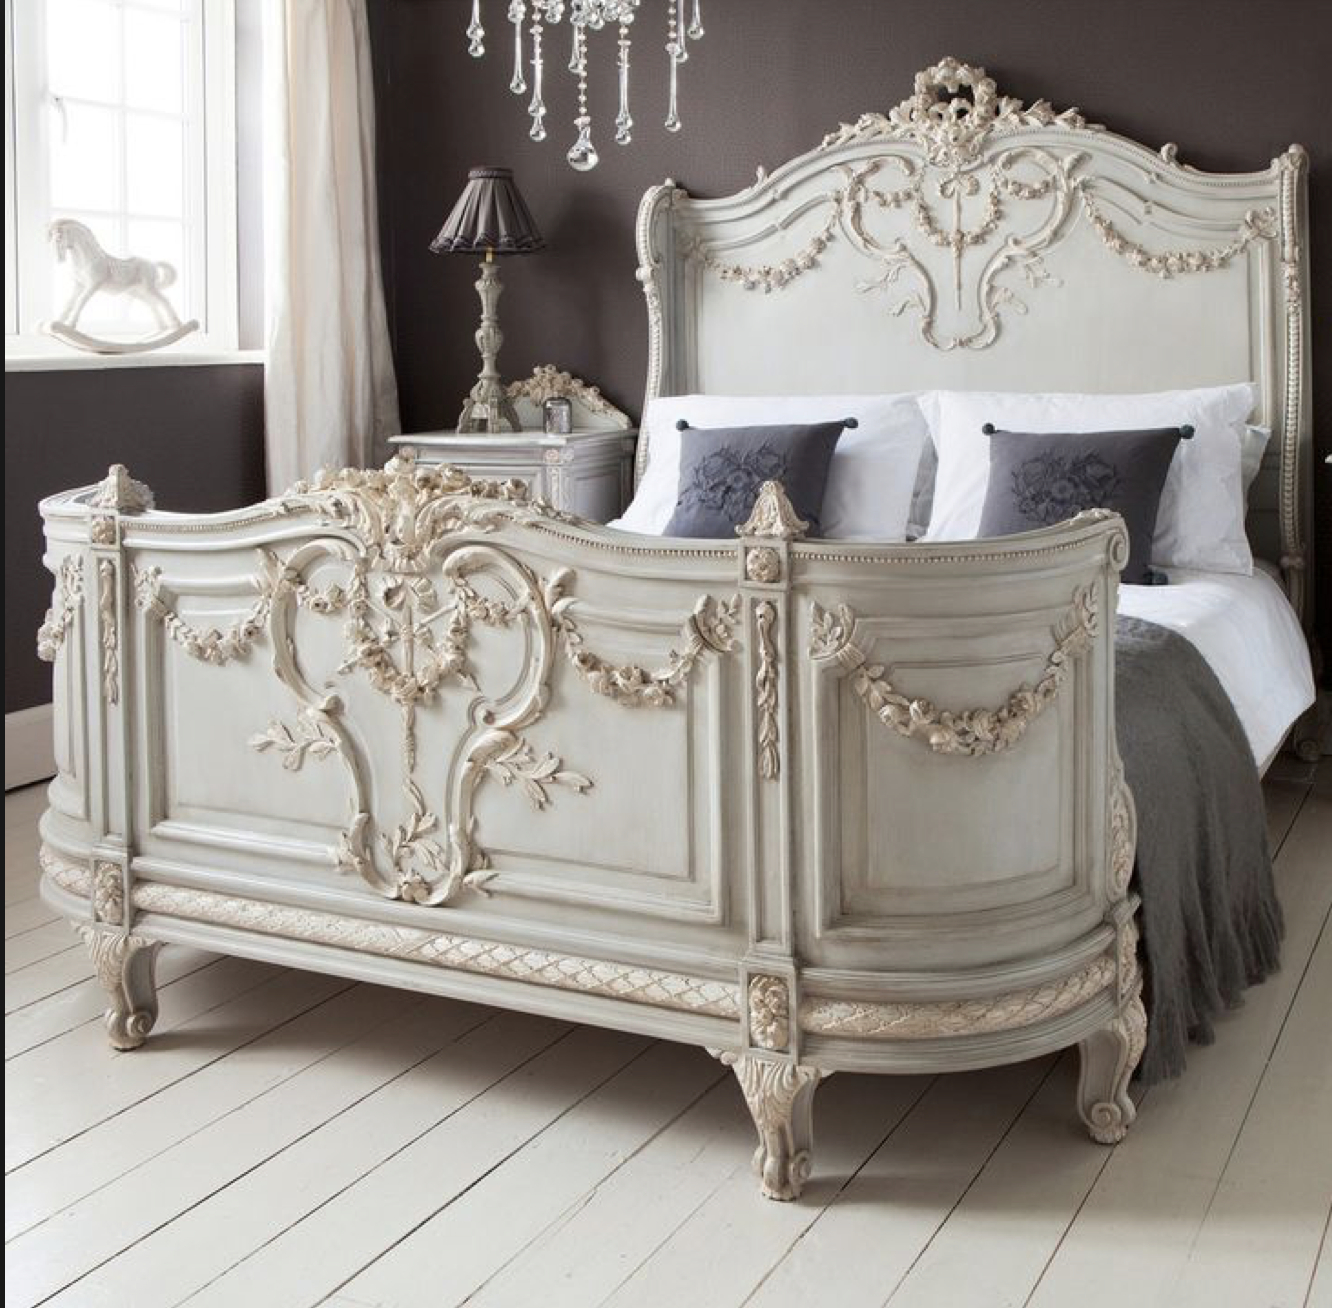 ROMANTIC FRENCH PROVINCIAL STYLE ANTIQUE GRAY QUEEN BED BEDROOM FURNITURE 